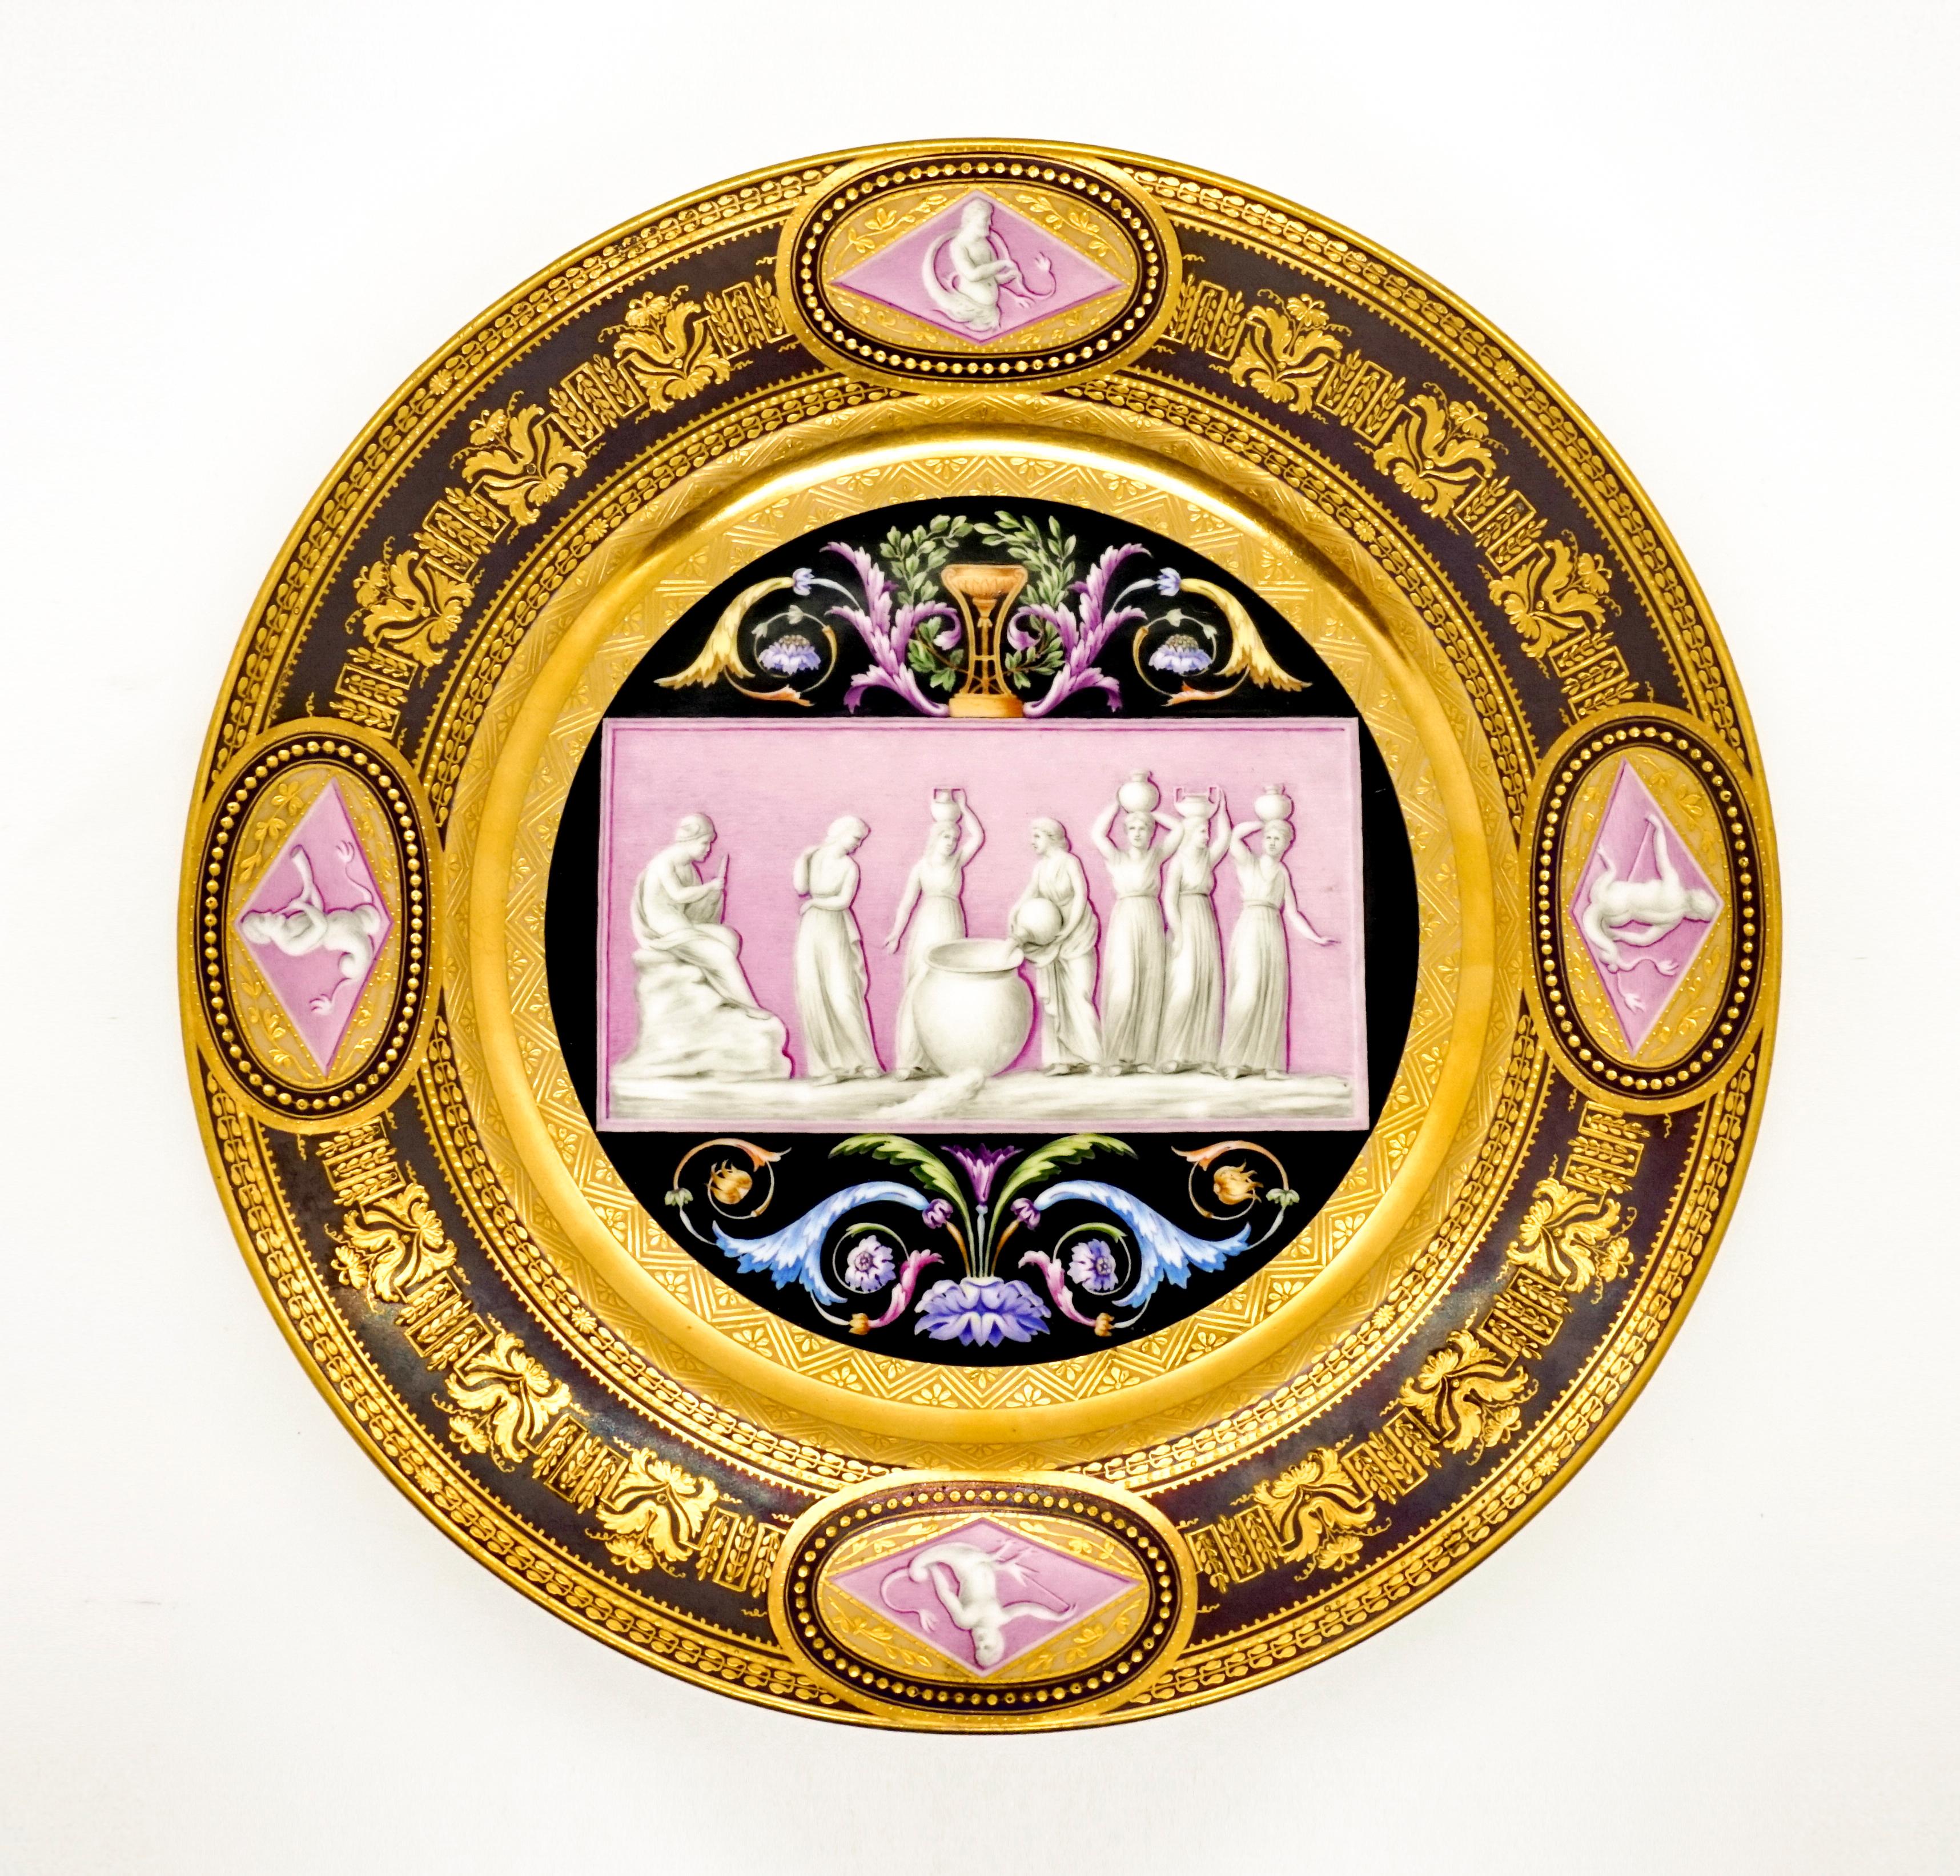 Extraordinarily decorated porcelain plate: in the mirror a pink, transversely rectangular picture panel against a black background, framed by brightly colored leaf and feather tendrils in the segments on the long sides, a cup 
and laurel wreath on